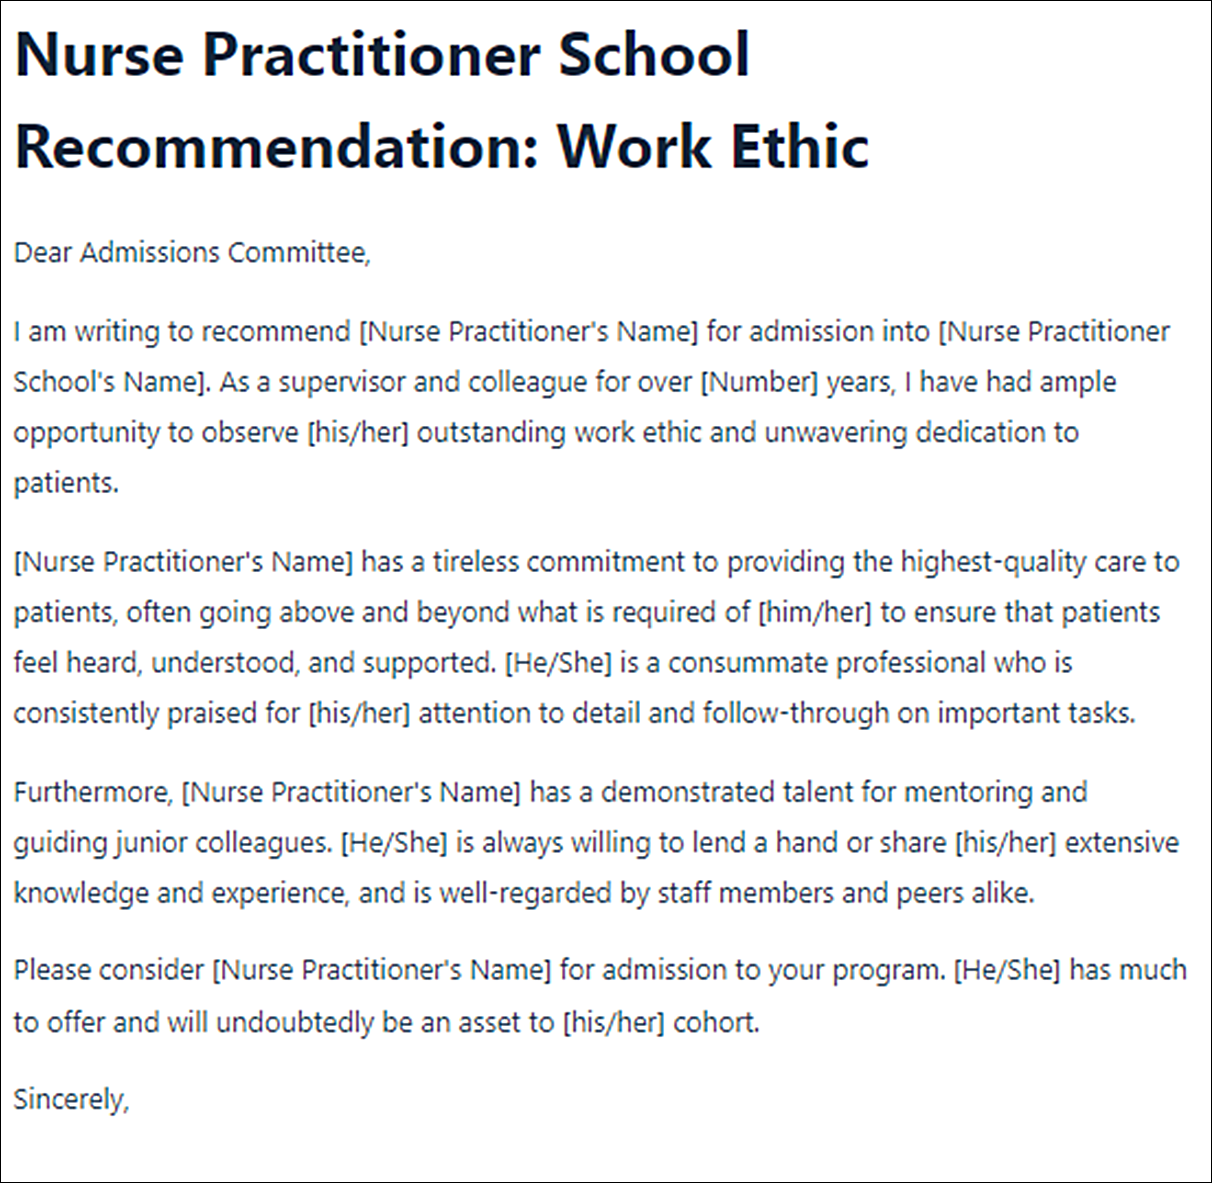 Letter of Recommendation Templates for Nurse Practitioner School 01